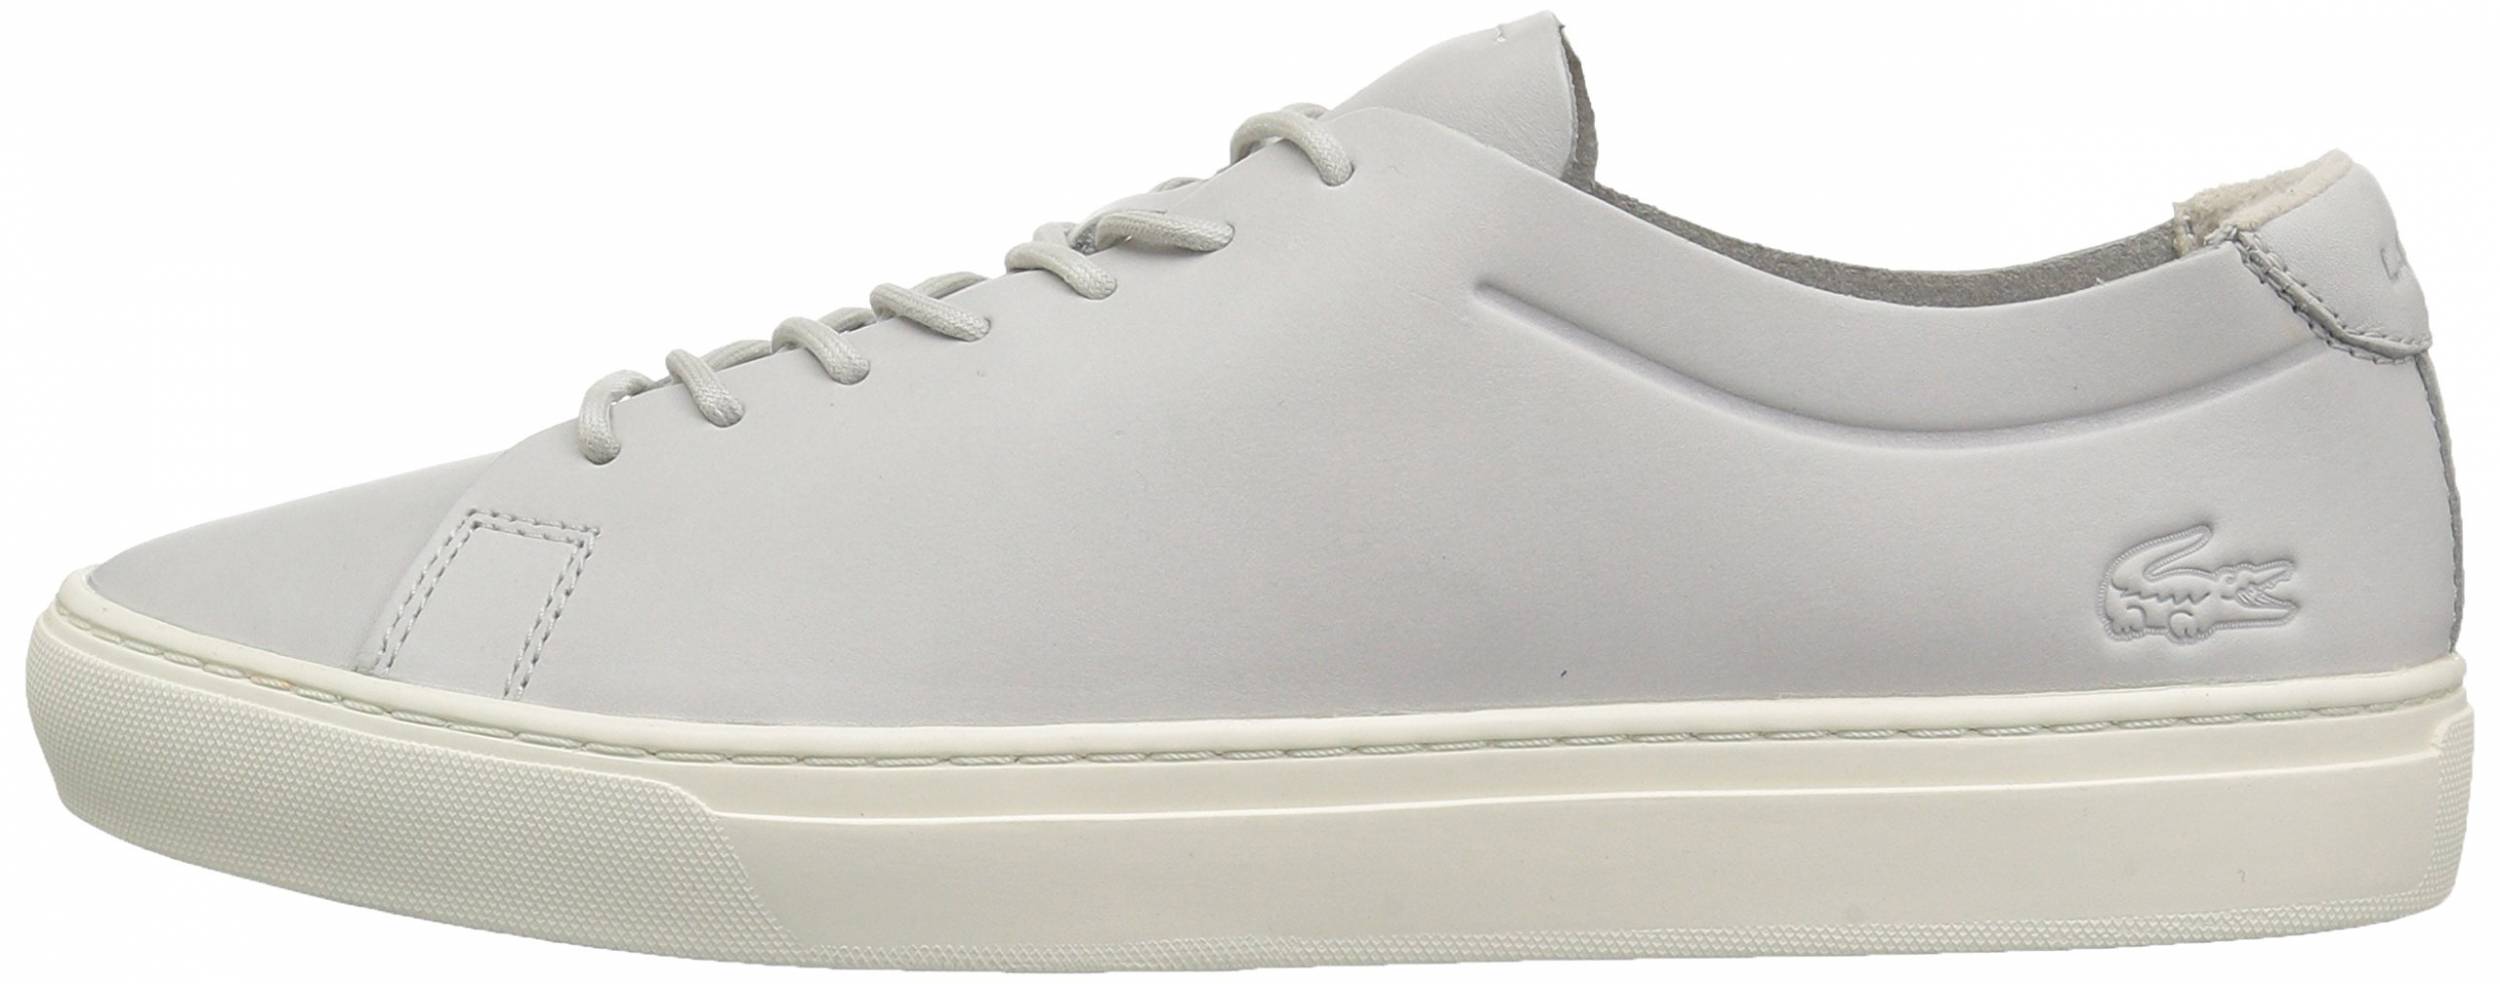 lacoste light trainers